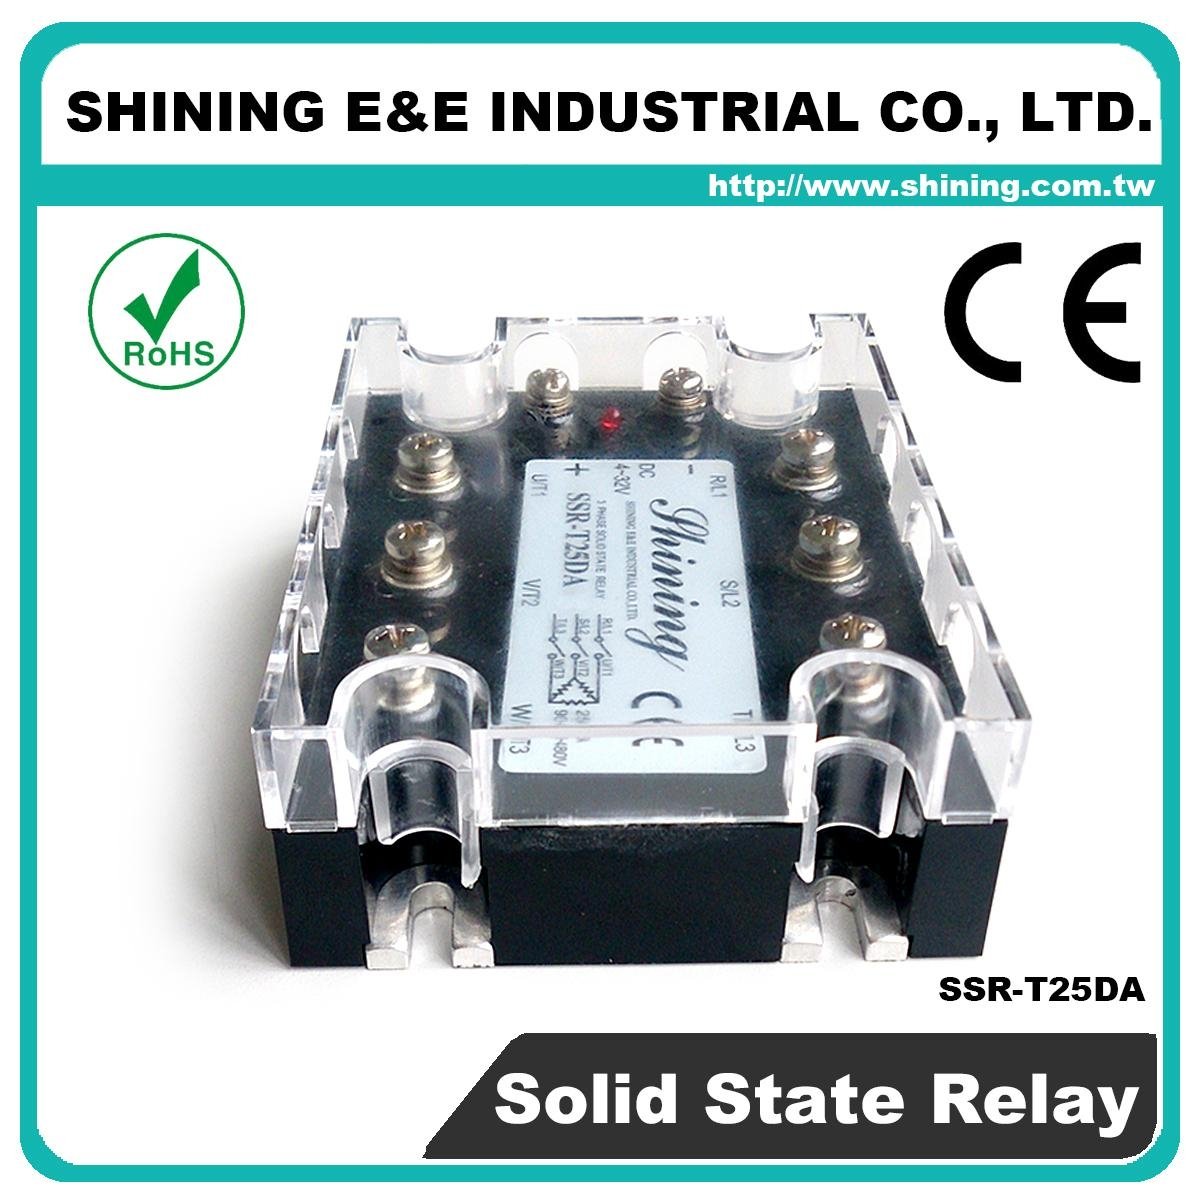 SSR-T25DA DC to AC Zero Cross Three Phase 25A Solid State Relays 2